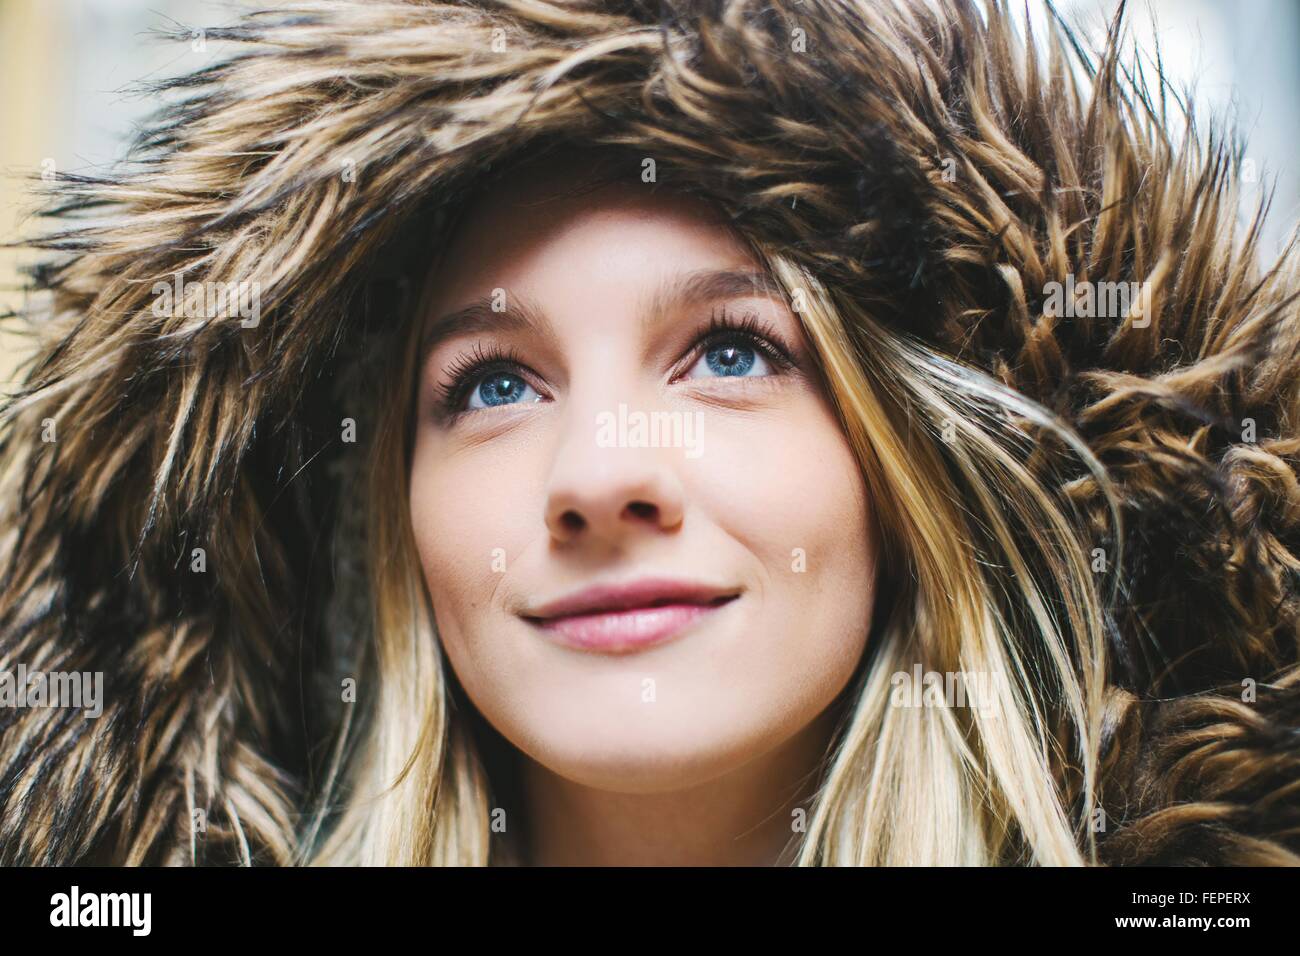 Close up portrait of young woman wearing fur hooded parka Stock Photo